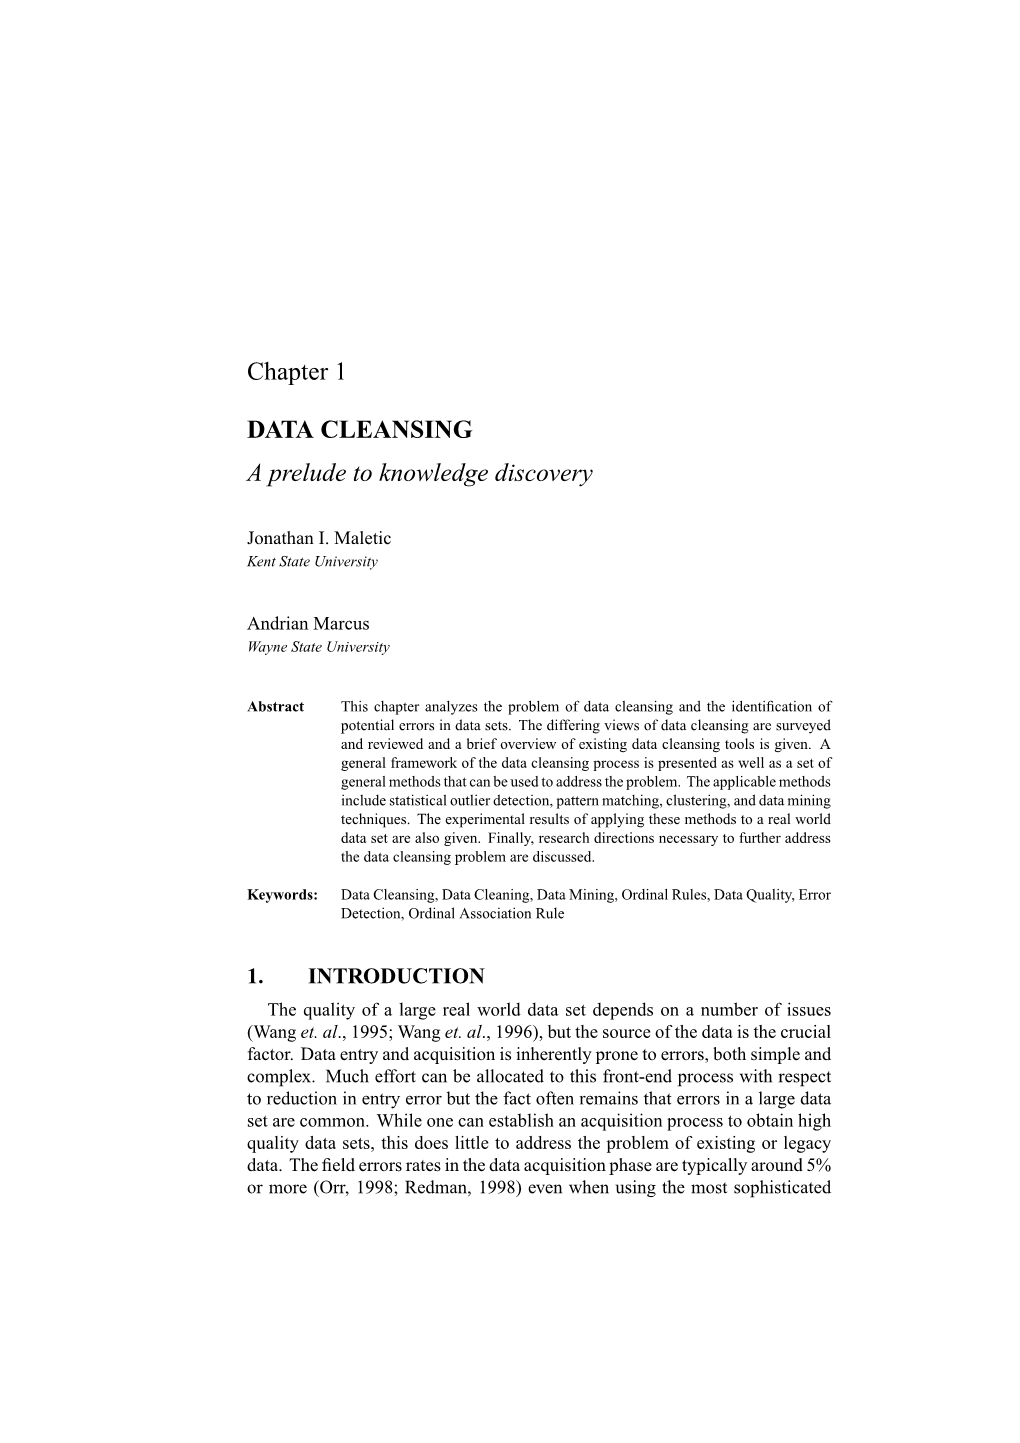 Chapter 1 DATA CLEANSING a Prelude to Knowledge Discovery